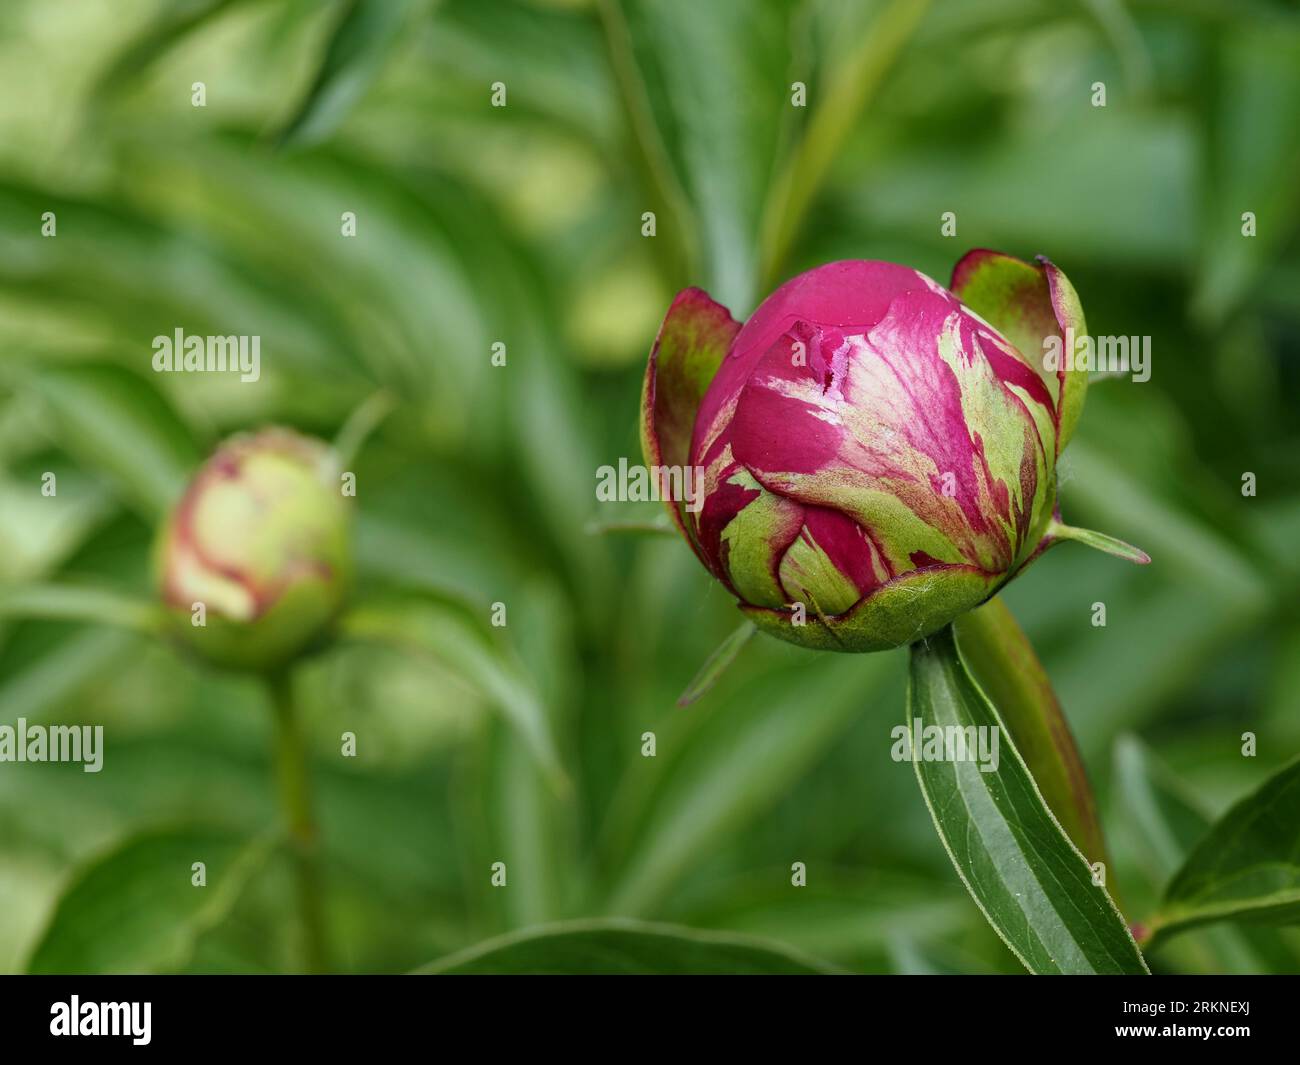 Magenta peony flower bud beginning to bloom in spring. Scientific name: Paeonia. Family: Paeoniaceae. Order: Saxifragales. Kingdom: Plantae. Stock Photo